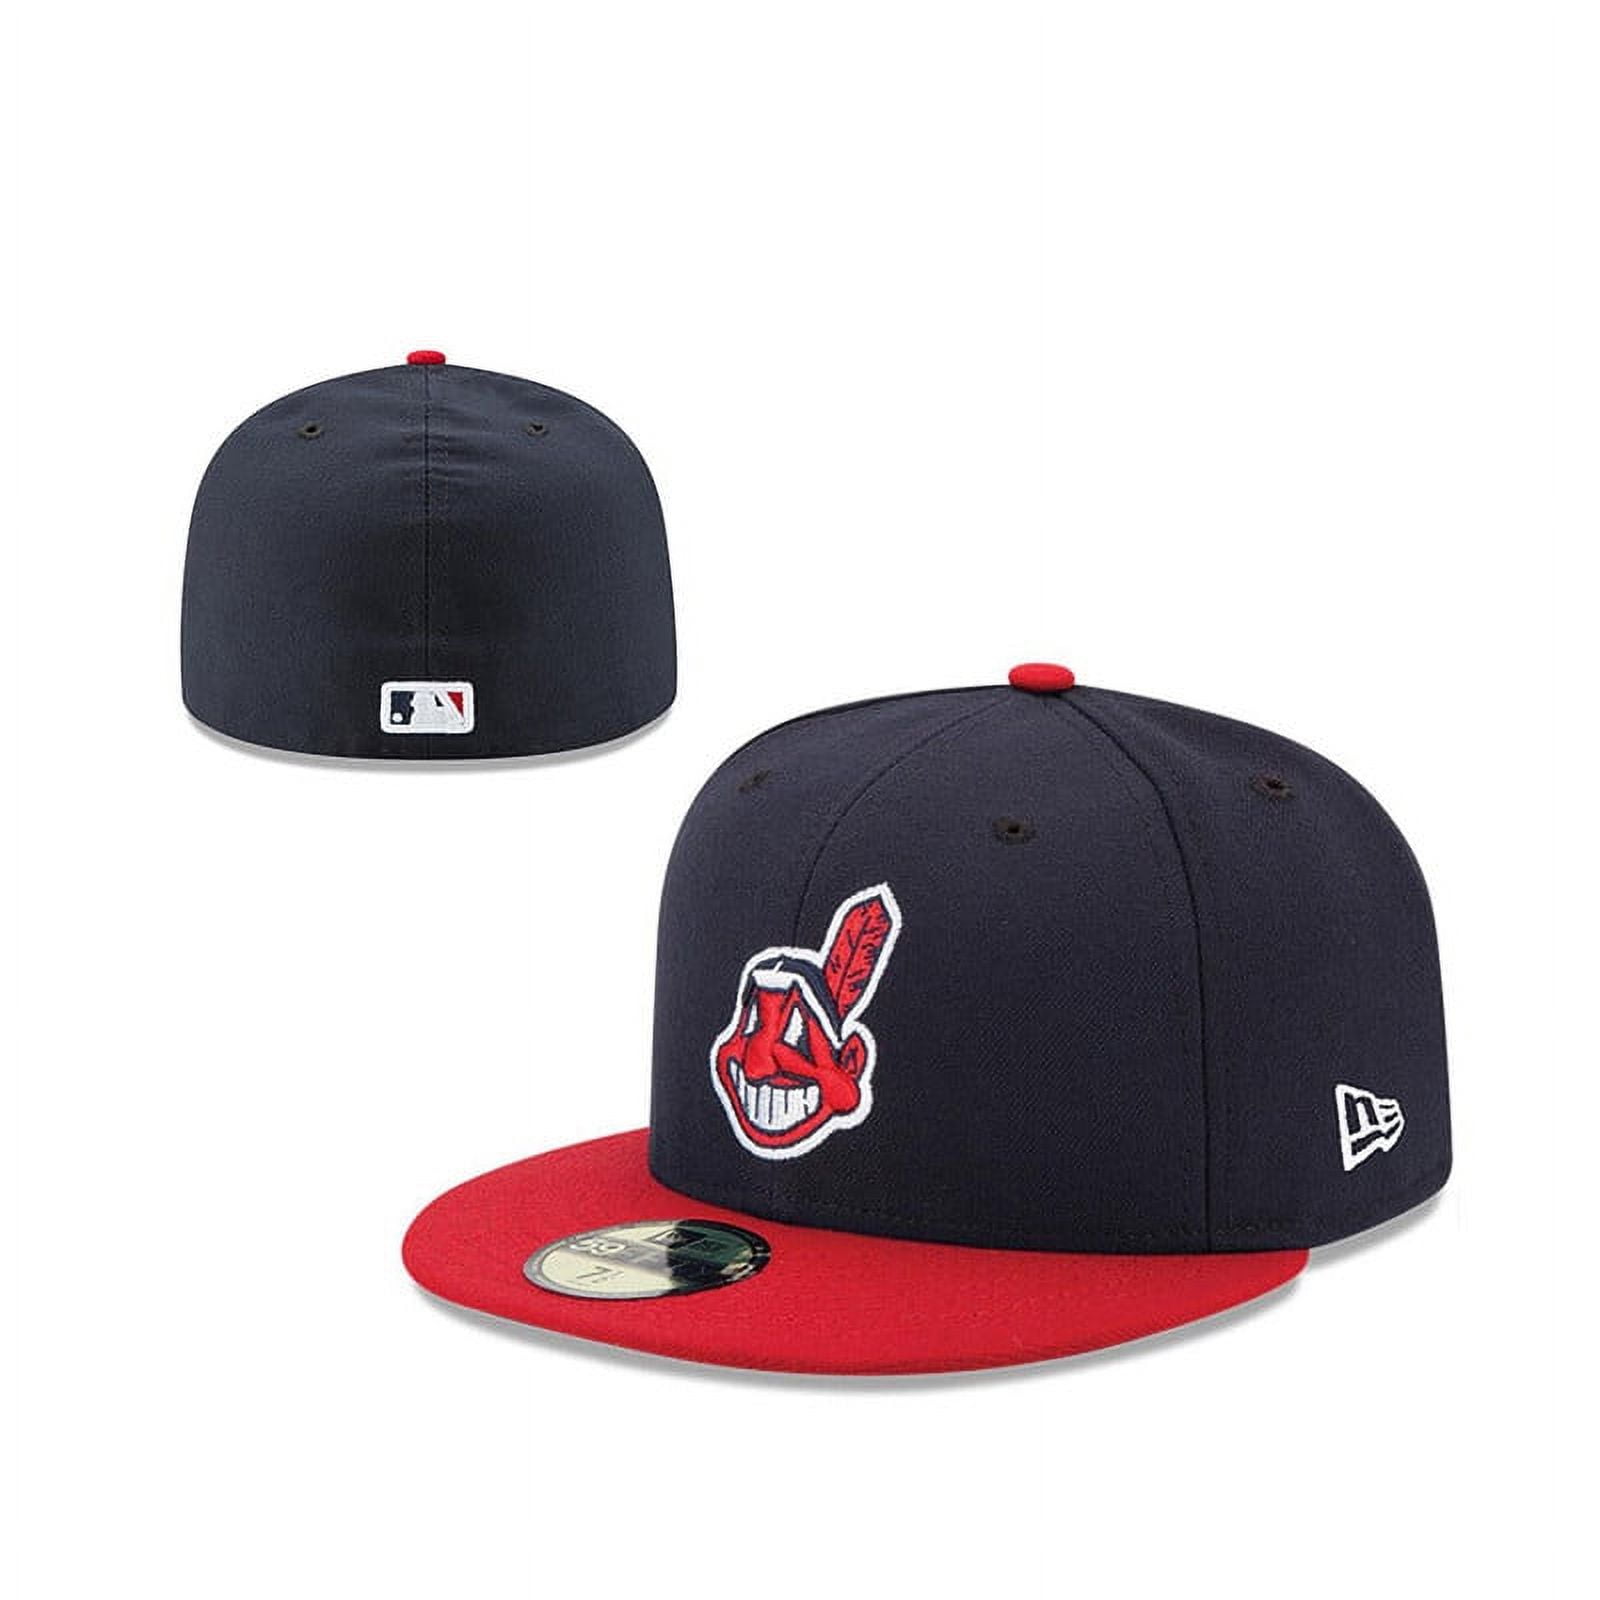 New Indians Classical 59FIFTY 5950 Fitted Baseball Cap Unisex black/red ...